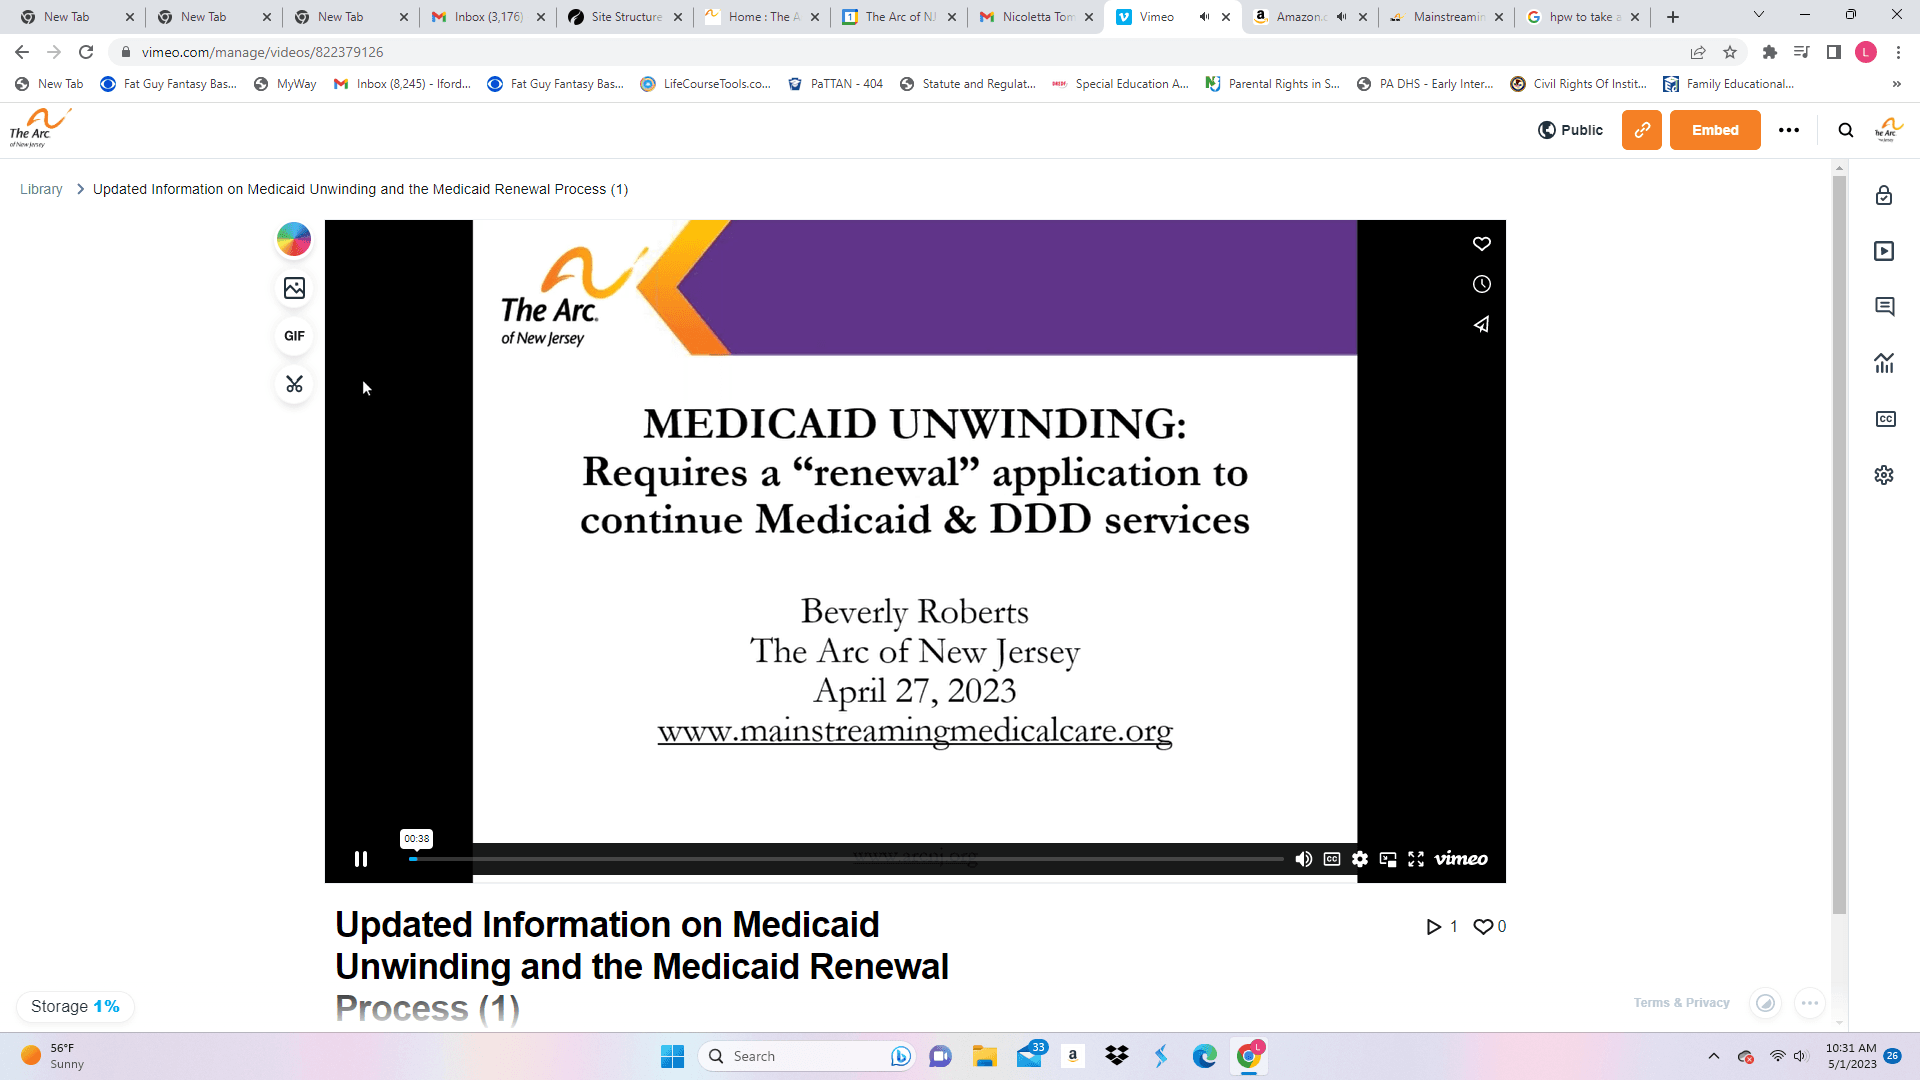 4/27/23 Webinar Slides: Updated Information on Medicaid Unwinding and the Medicaid Renewal Process